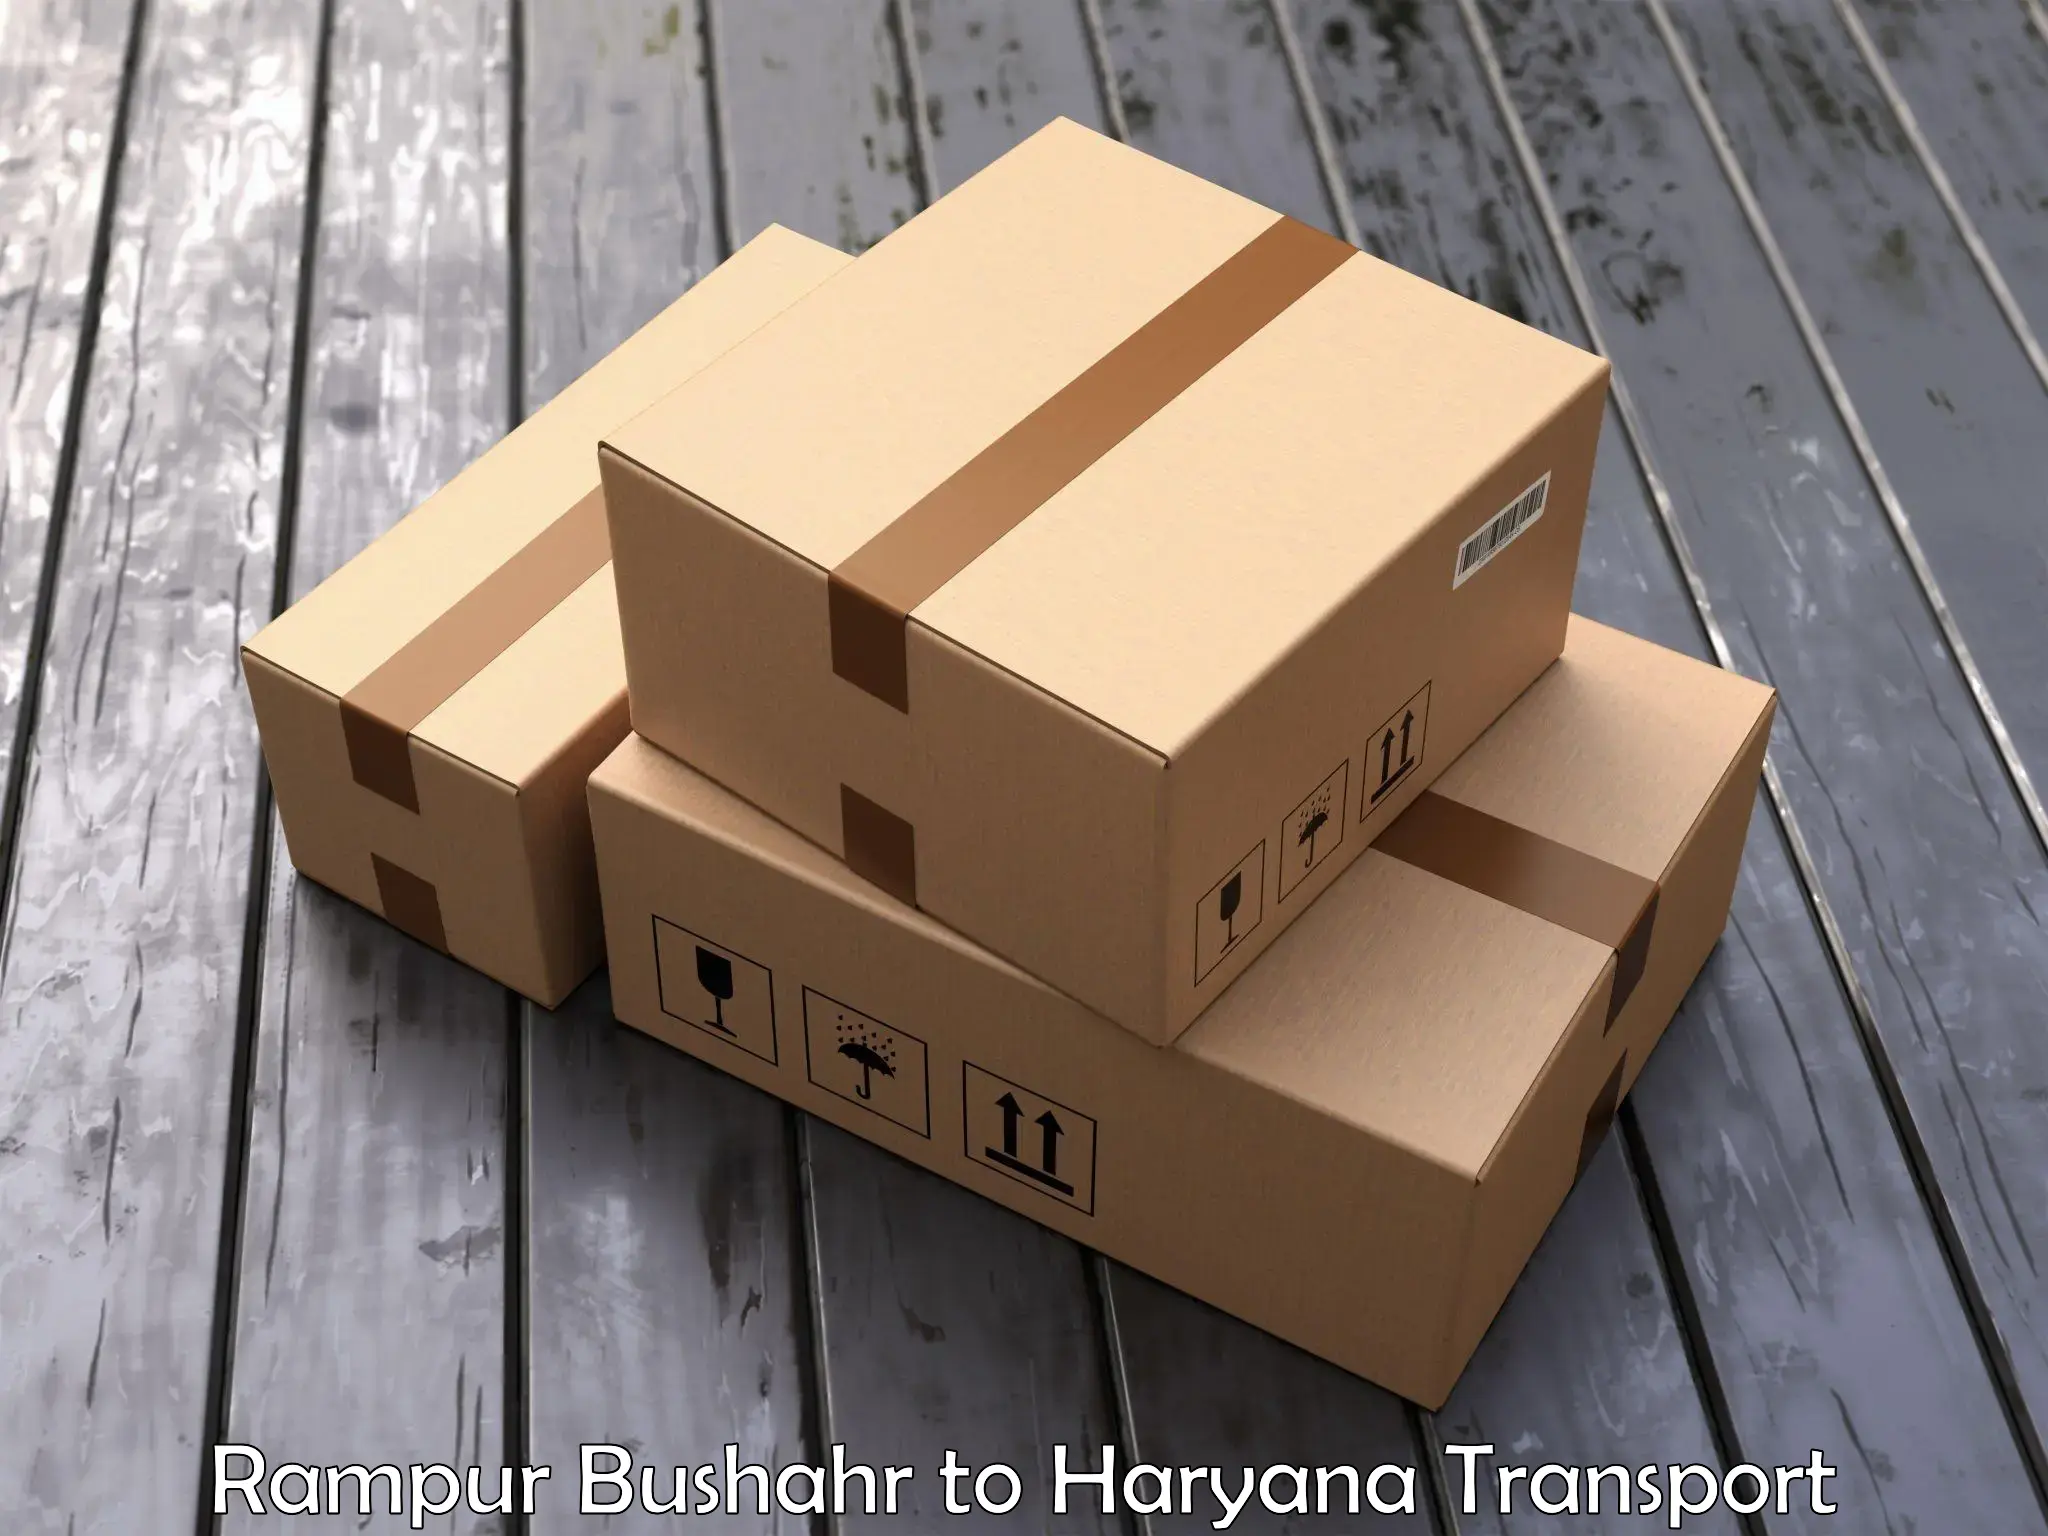 Express transport services in Rampur Bushahr to Chaudhary Charan Singh Haryana Agricultural University Hisar